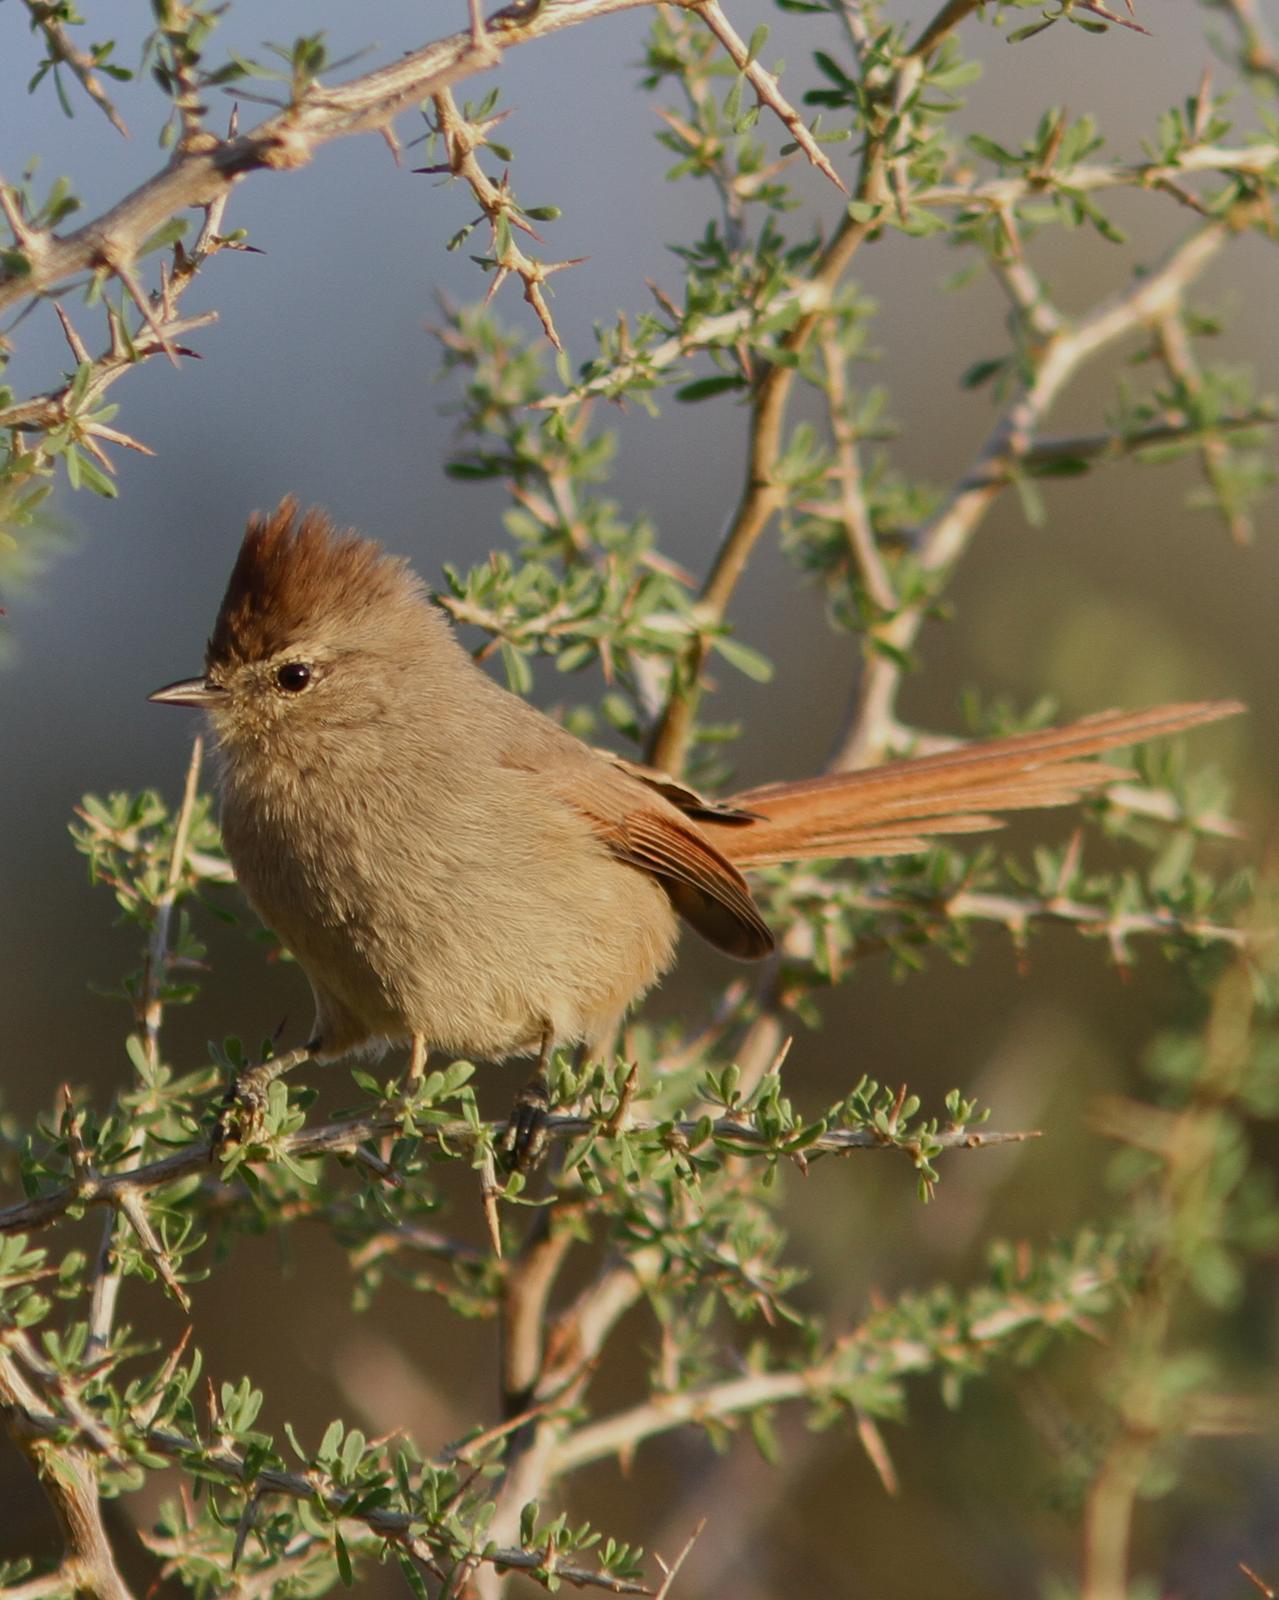 Brown-capped Tit-Spinetail Photo by Marcelo Padua